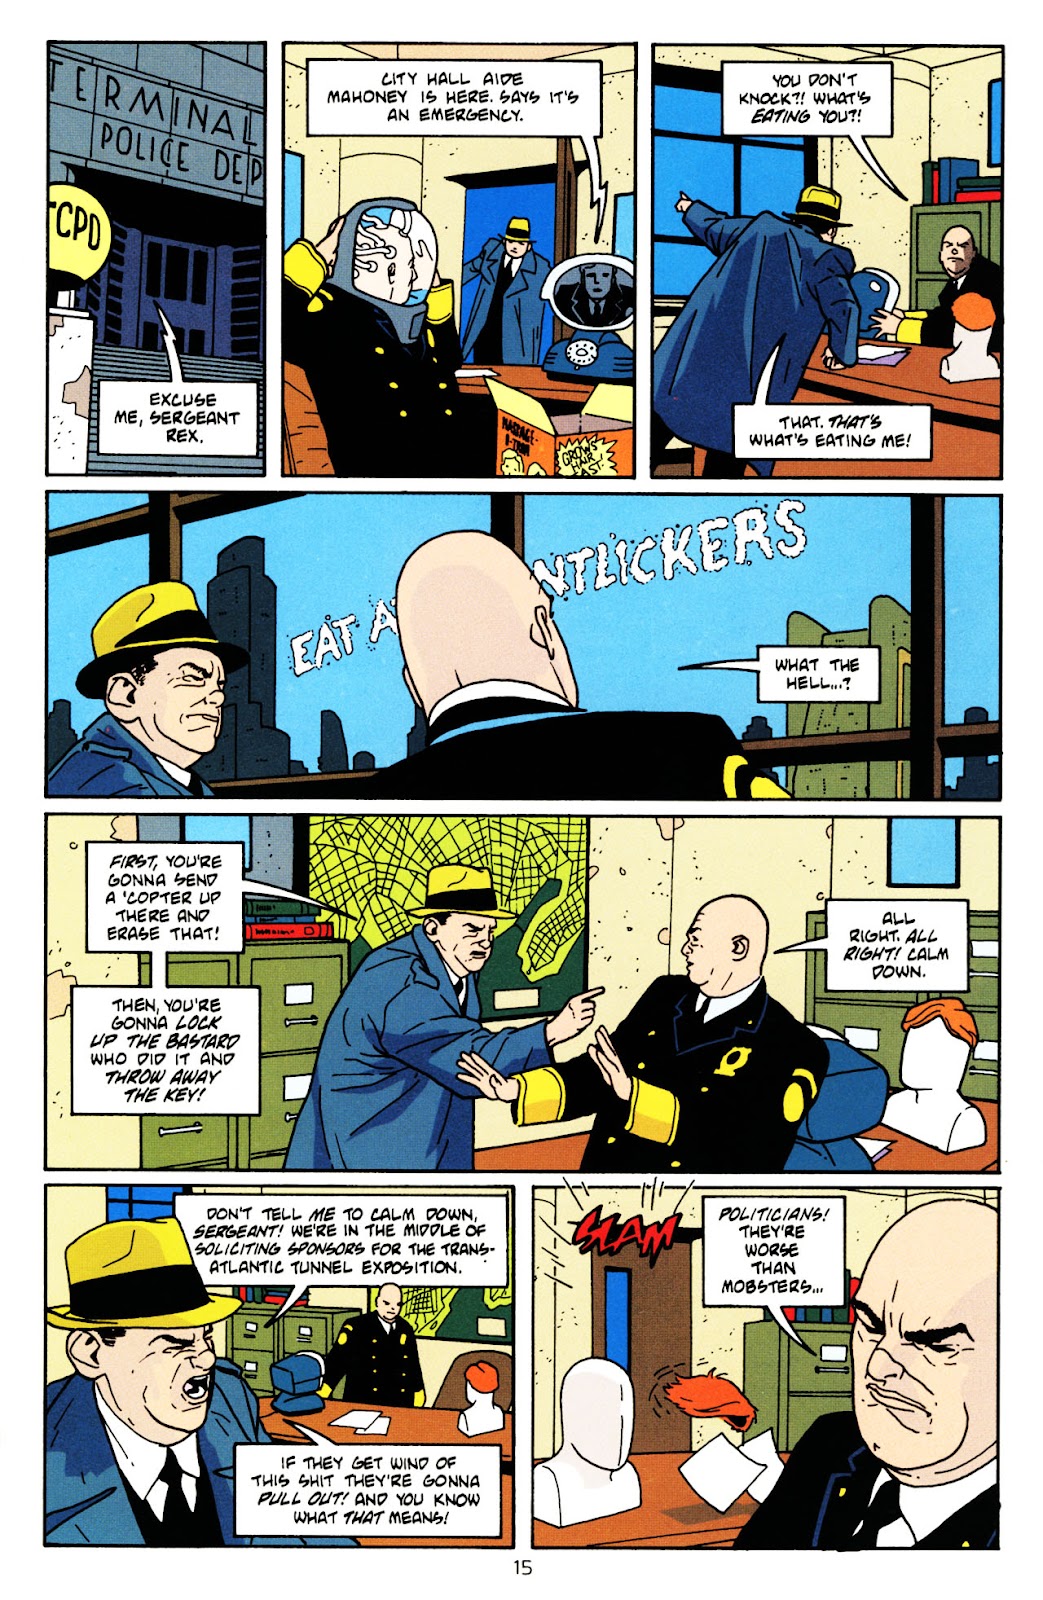 Terminal City: Aerial Graffiti issue 1 - Page 16